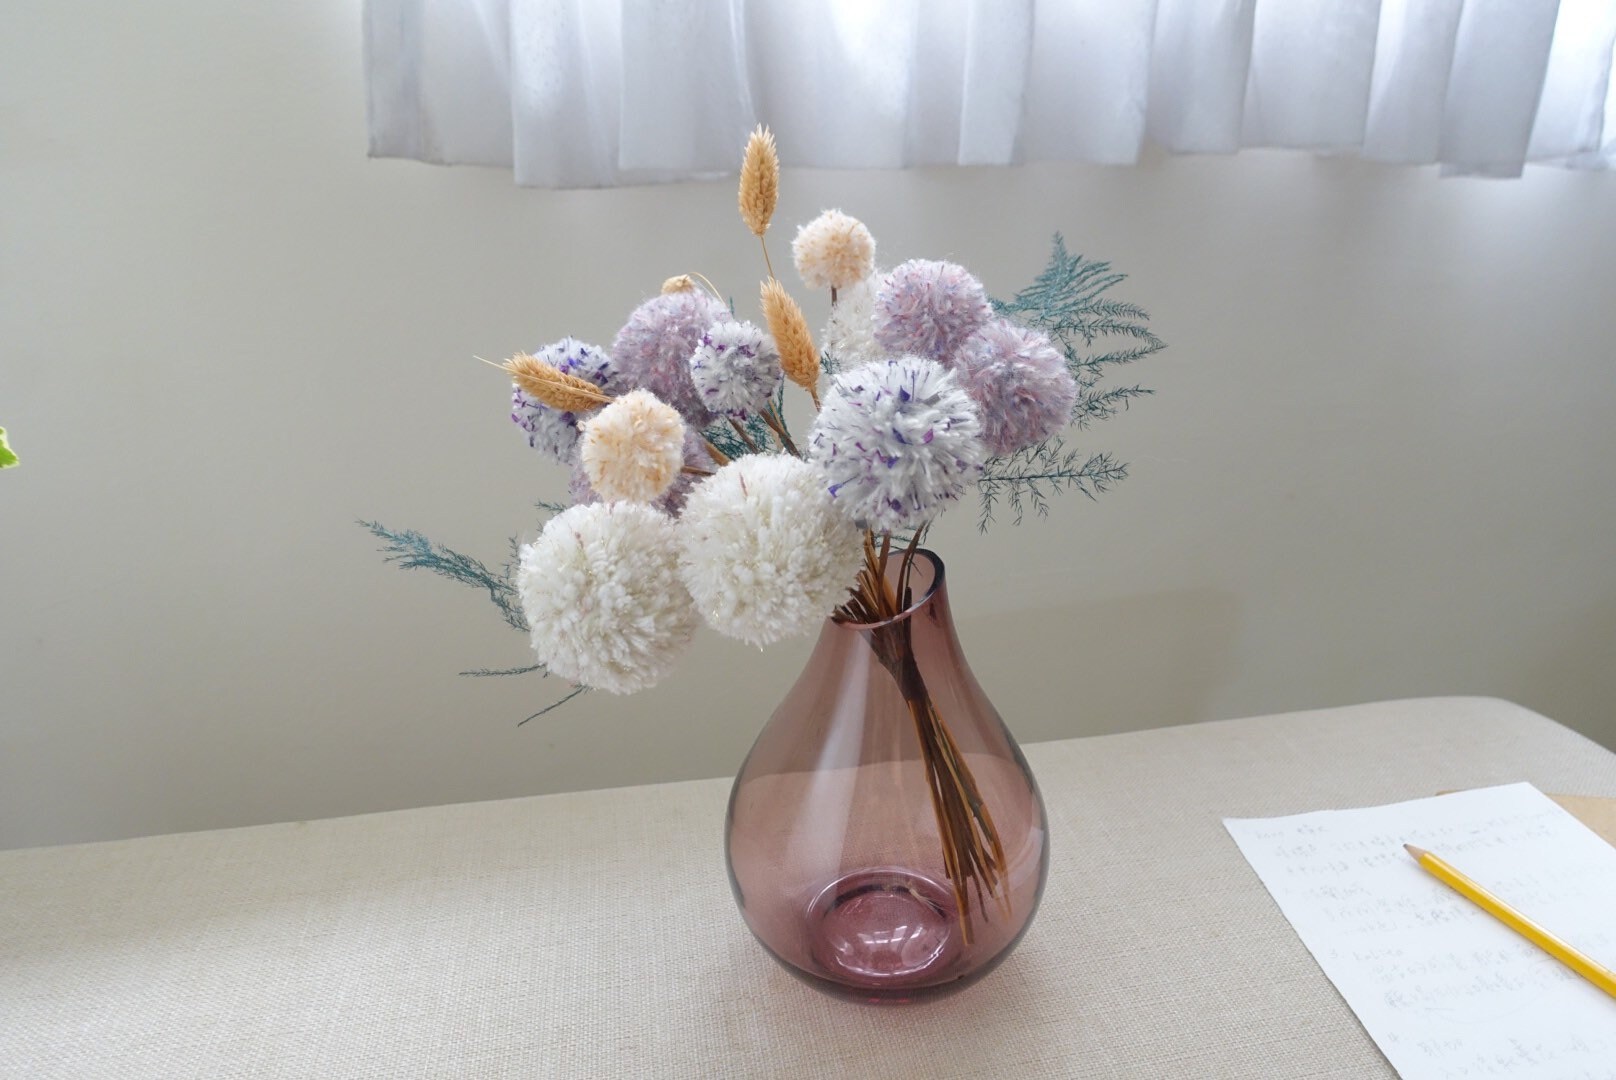 Mexican Tissue Pom Poms Flowers Paper Wedding Flower Photo Wall